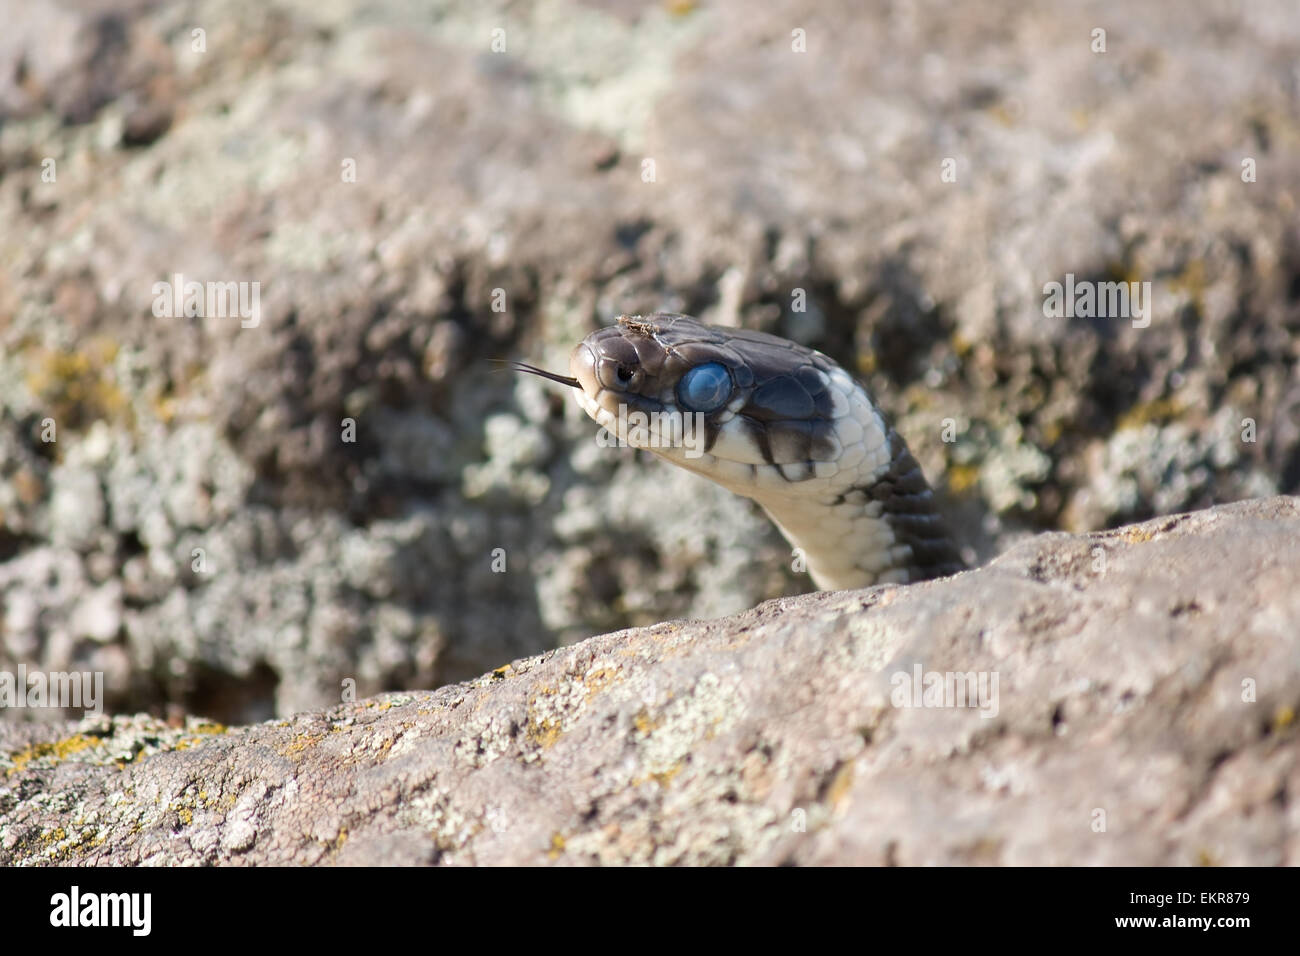 Head of the grass snake in a crevice between the stones Stock Photo